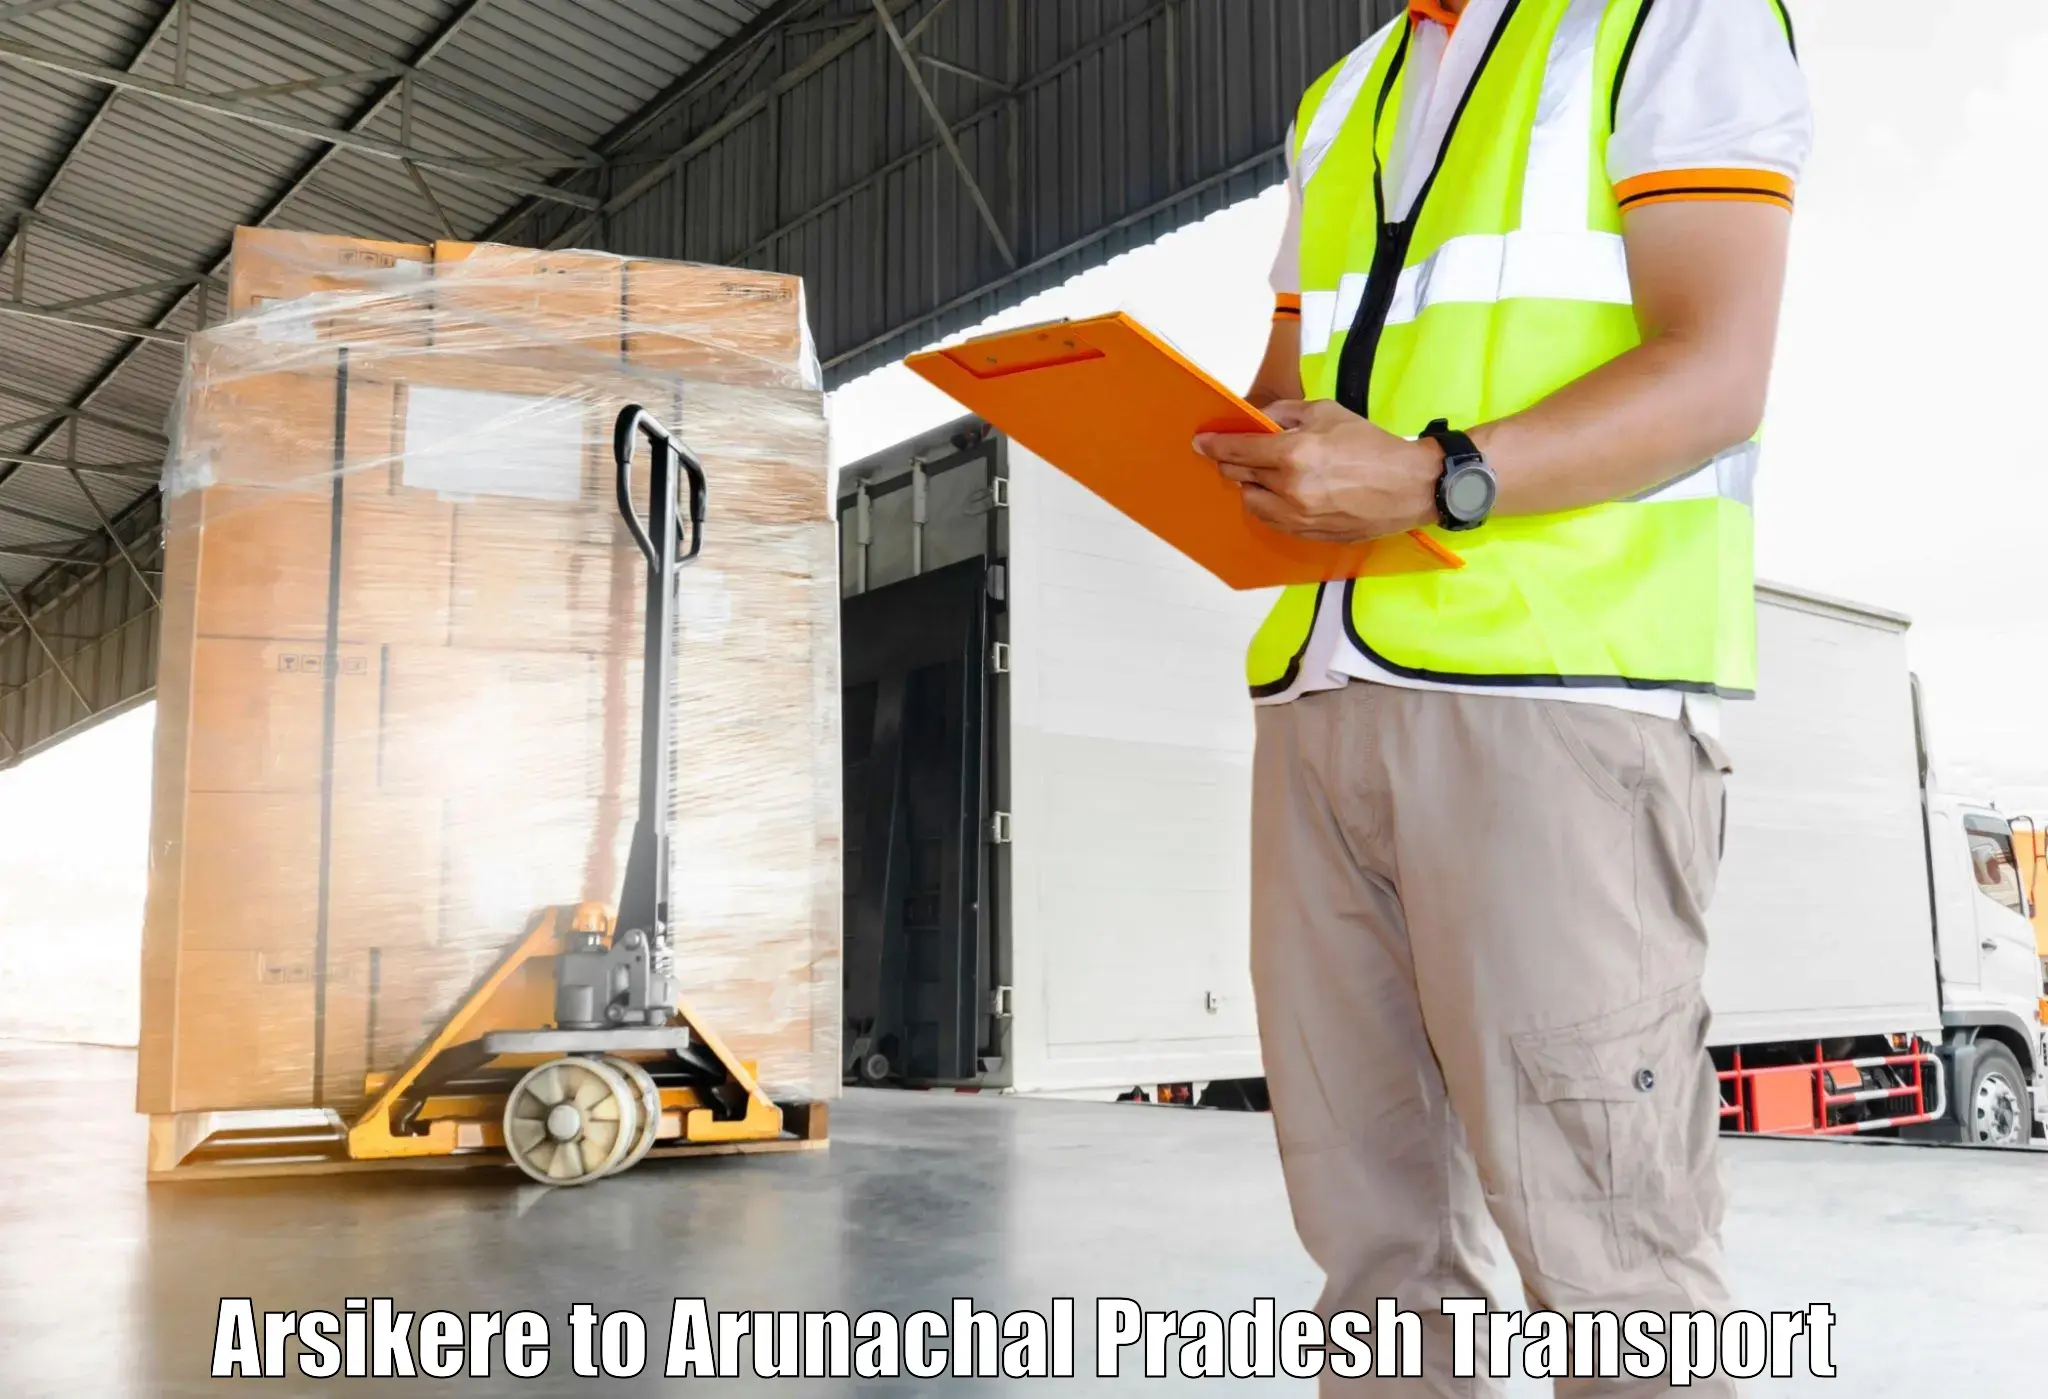 Two wheeler parcel service Arsikere to Pasighat